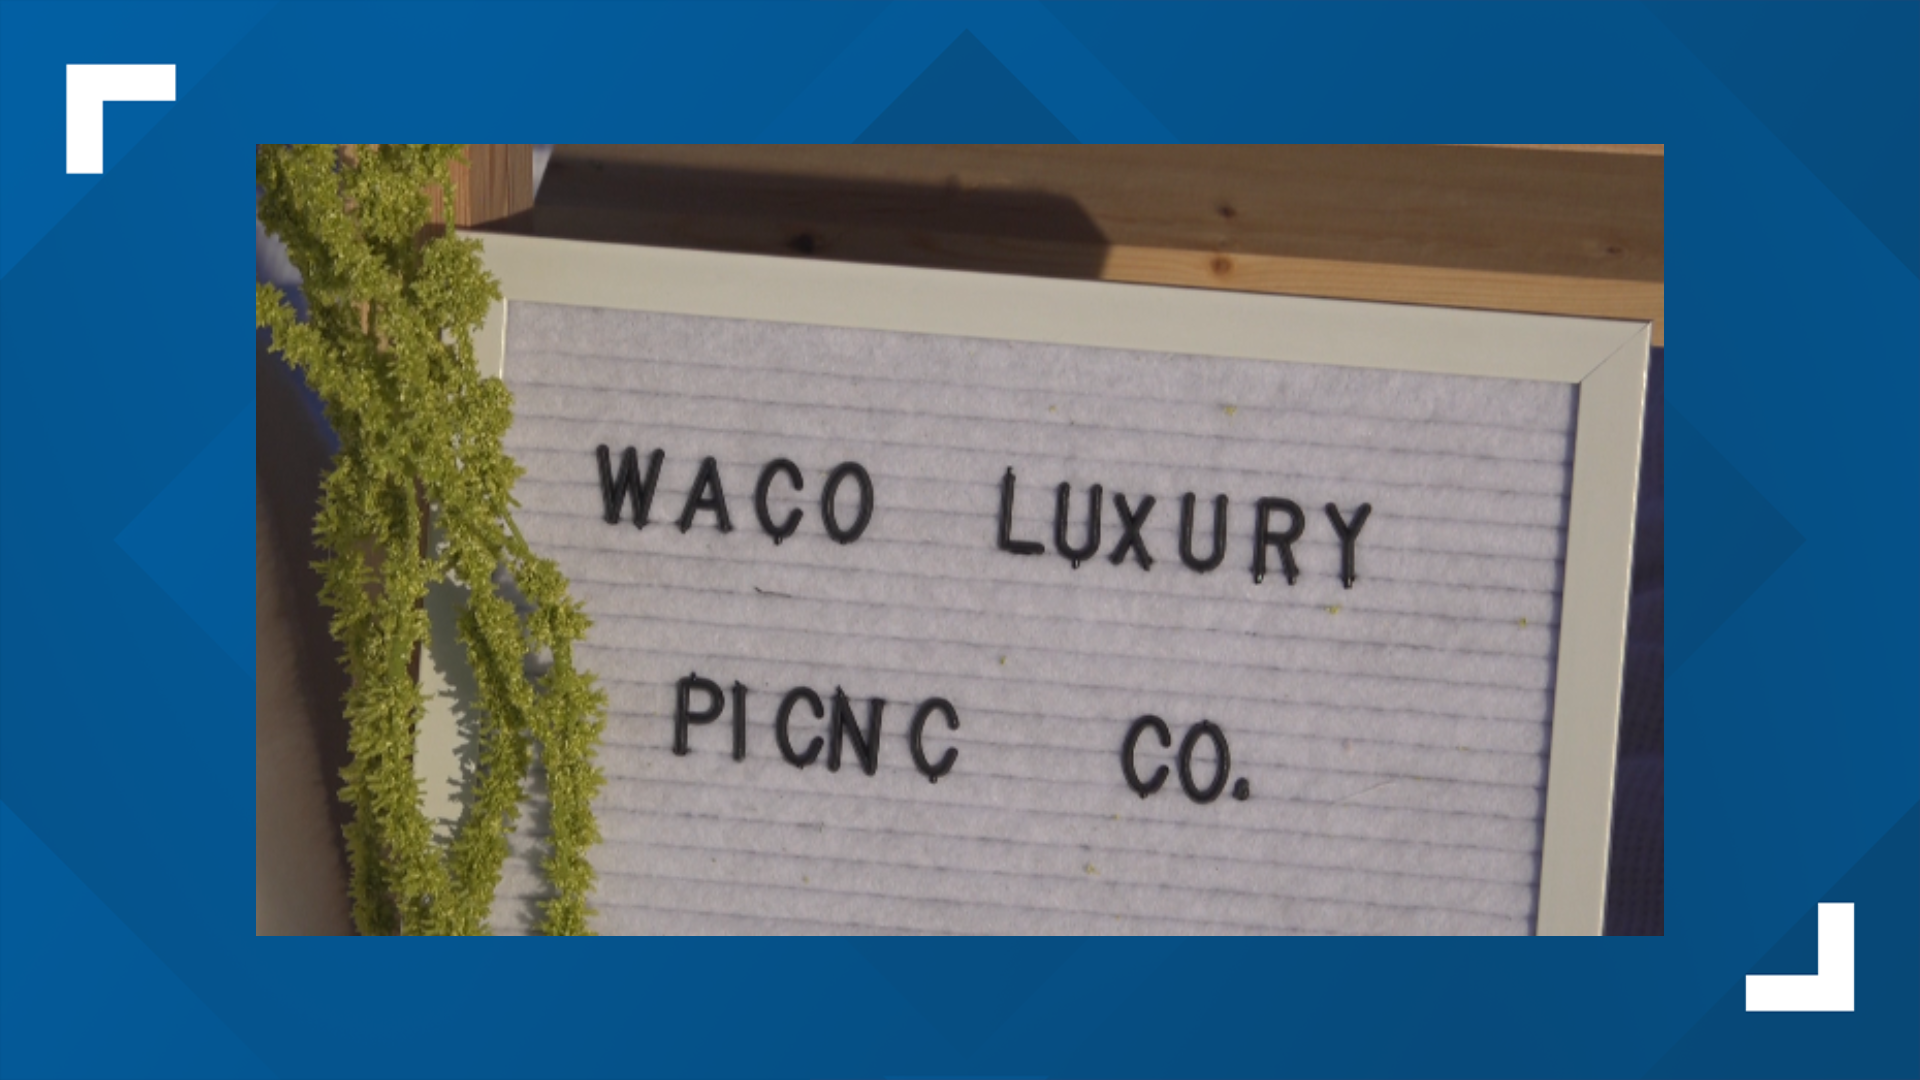 Looking for a socially distanced activity in the pandemic? Waco Luxury Picnic Company may have your fix.